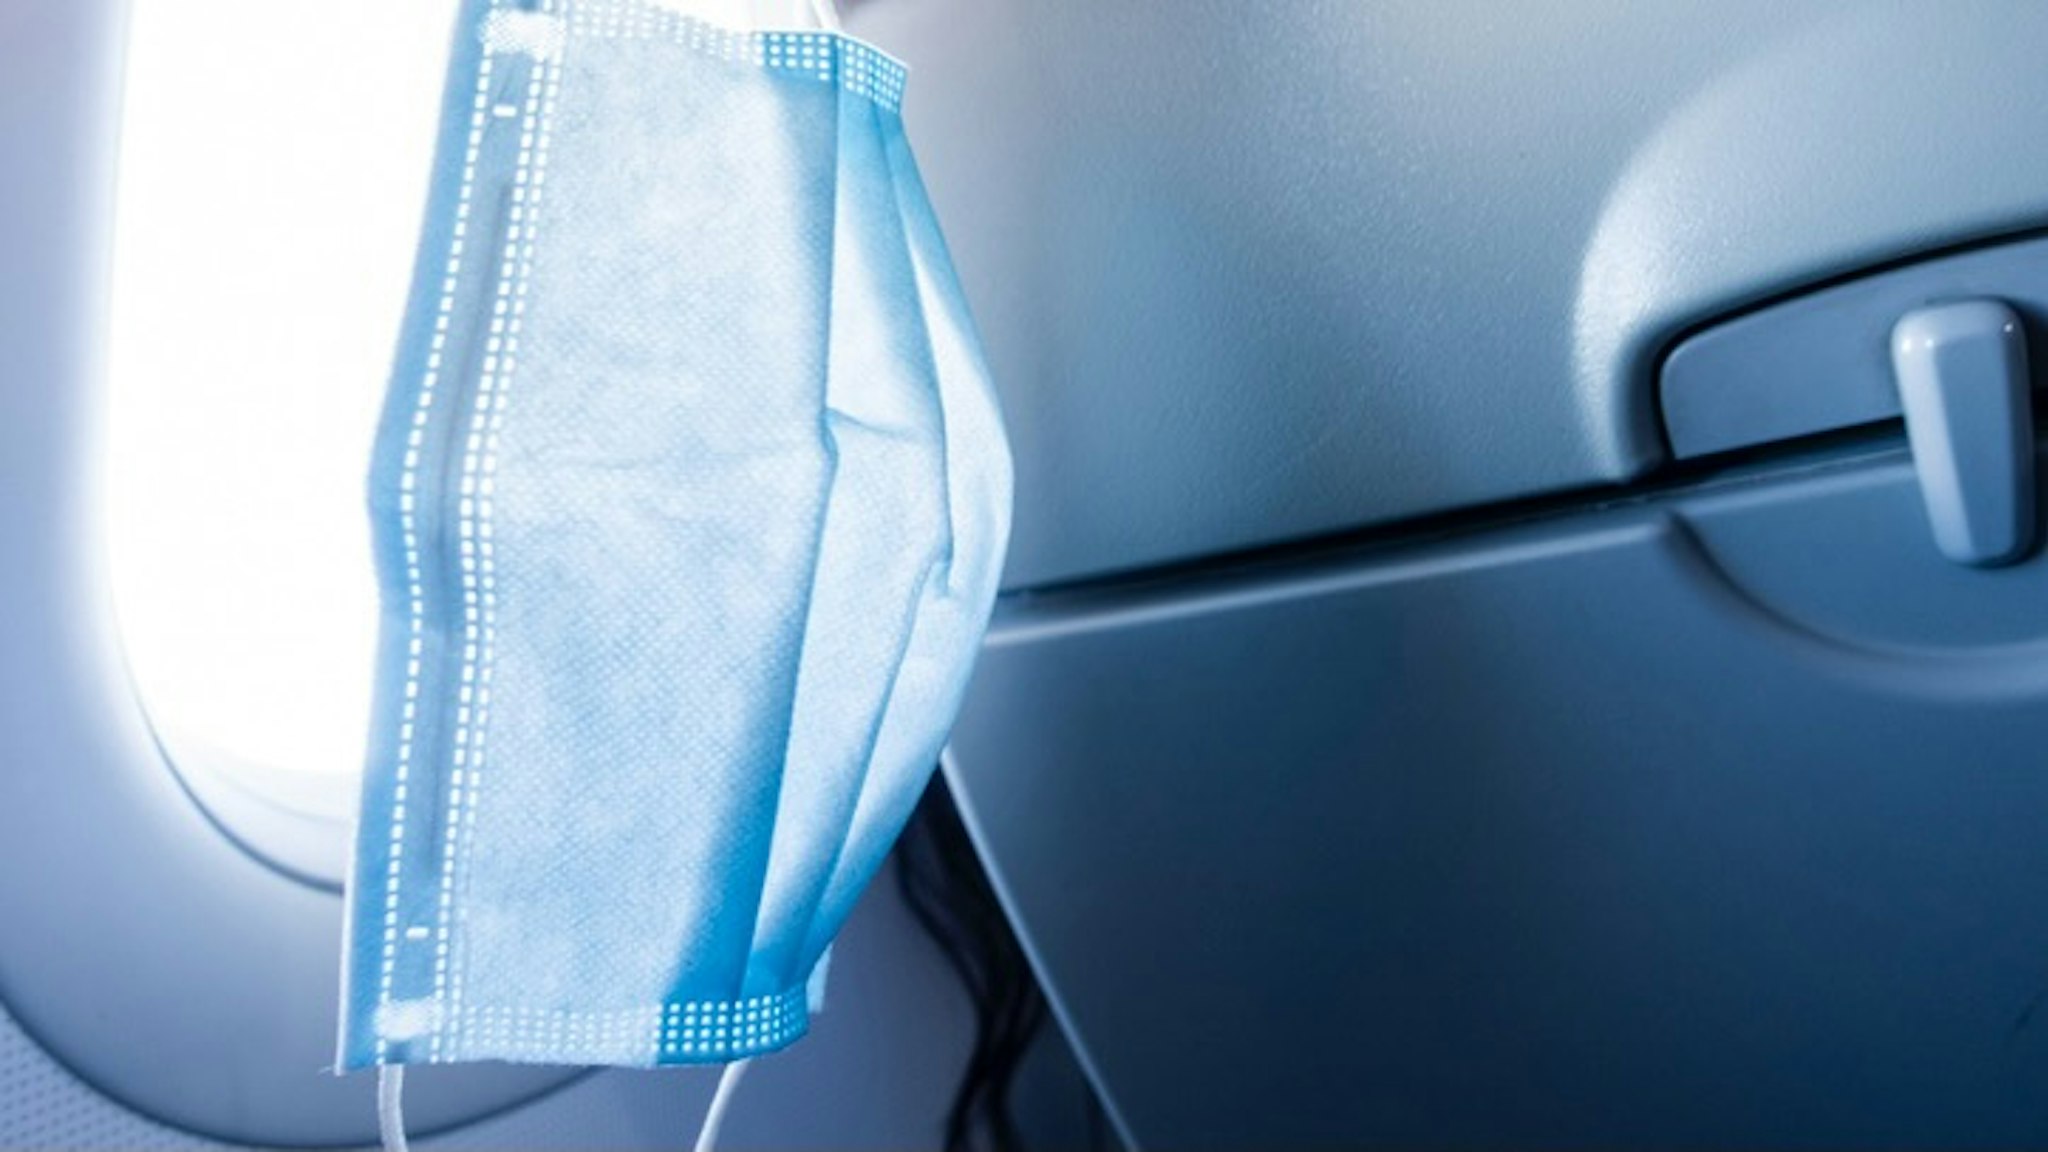 Surgical masks in airplane - stock photo DuKai photographer via Getty Images